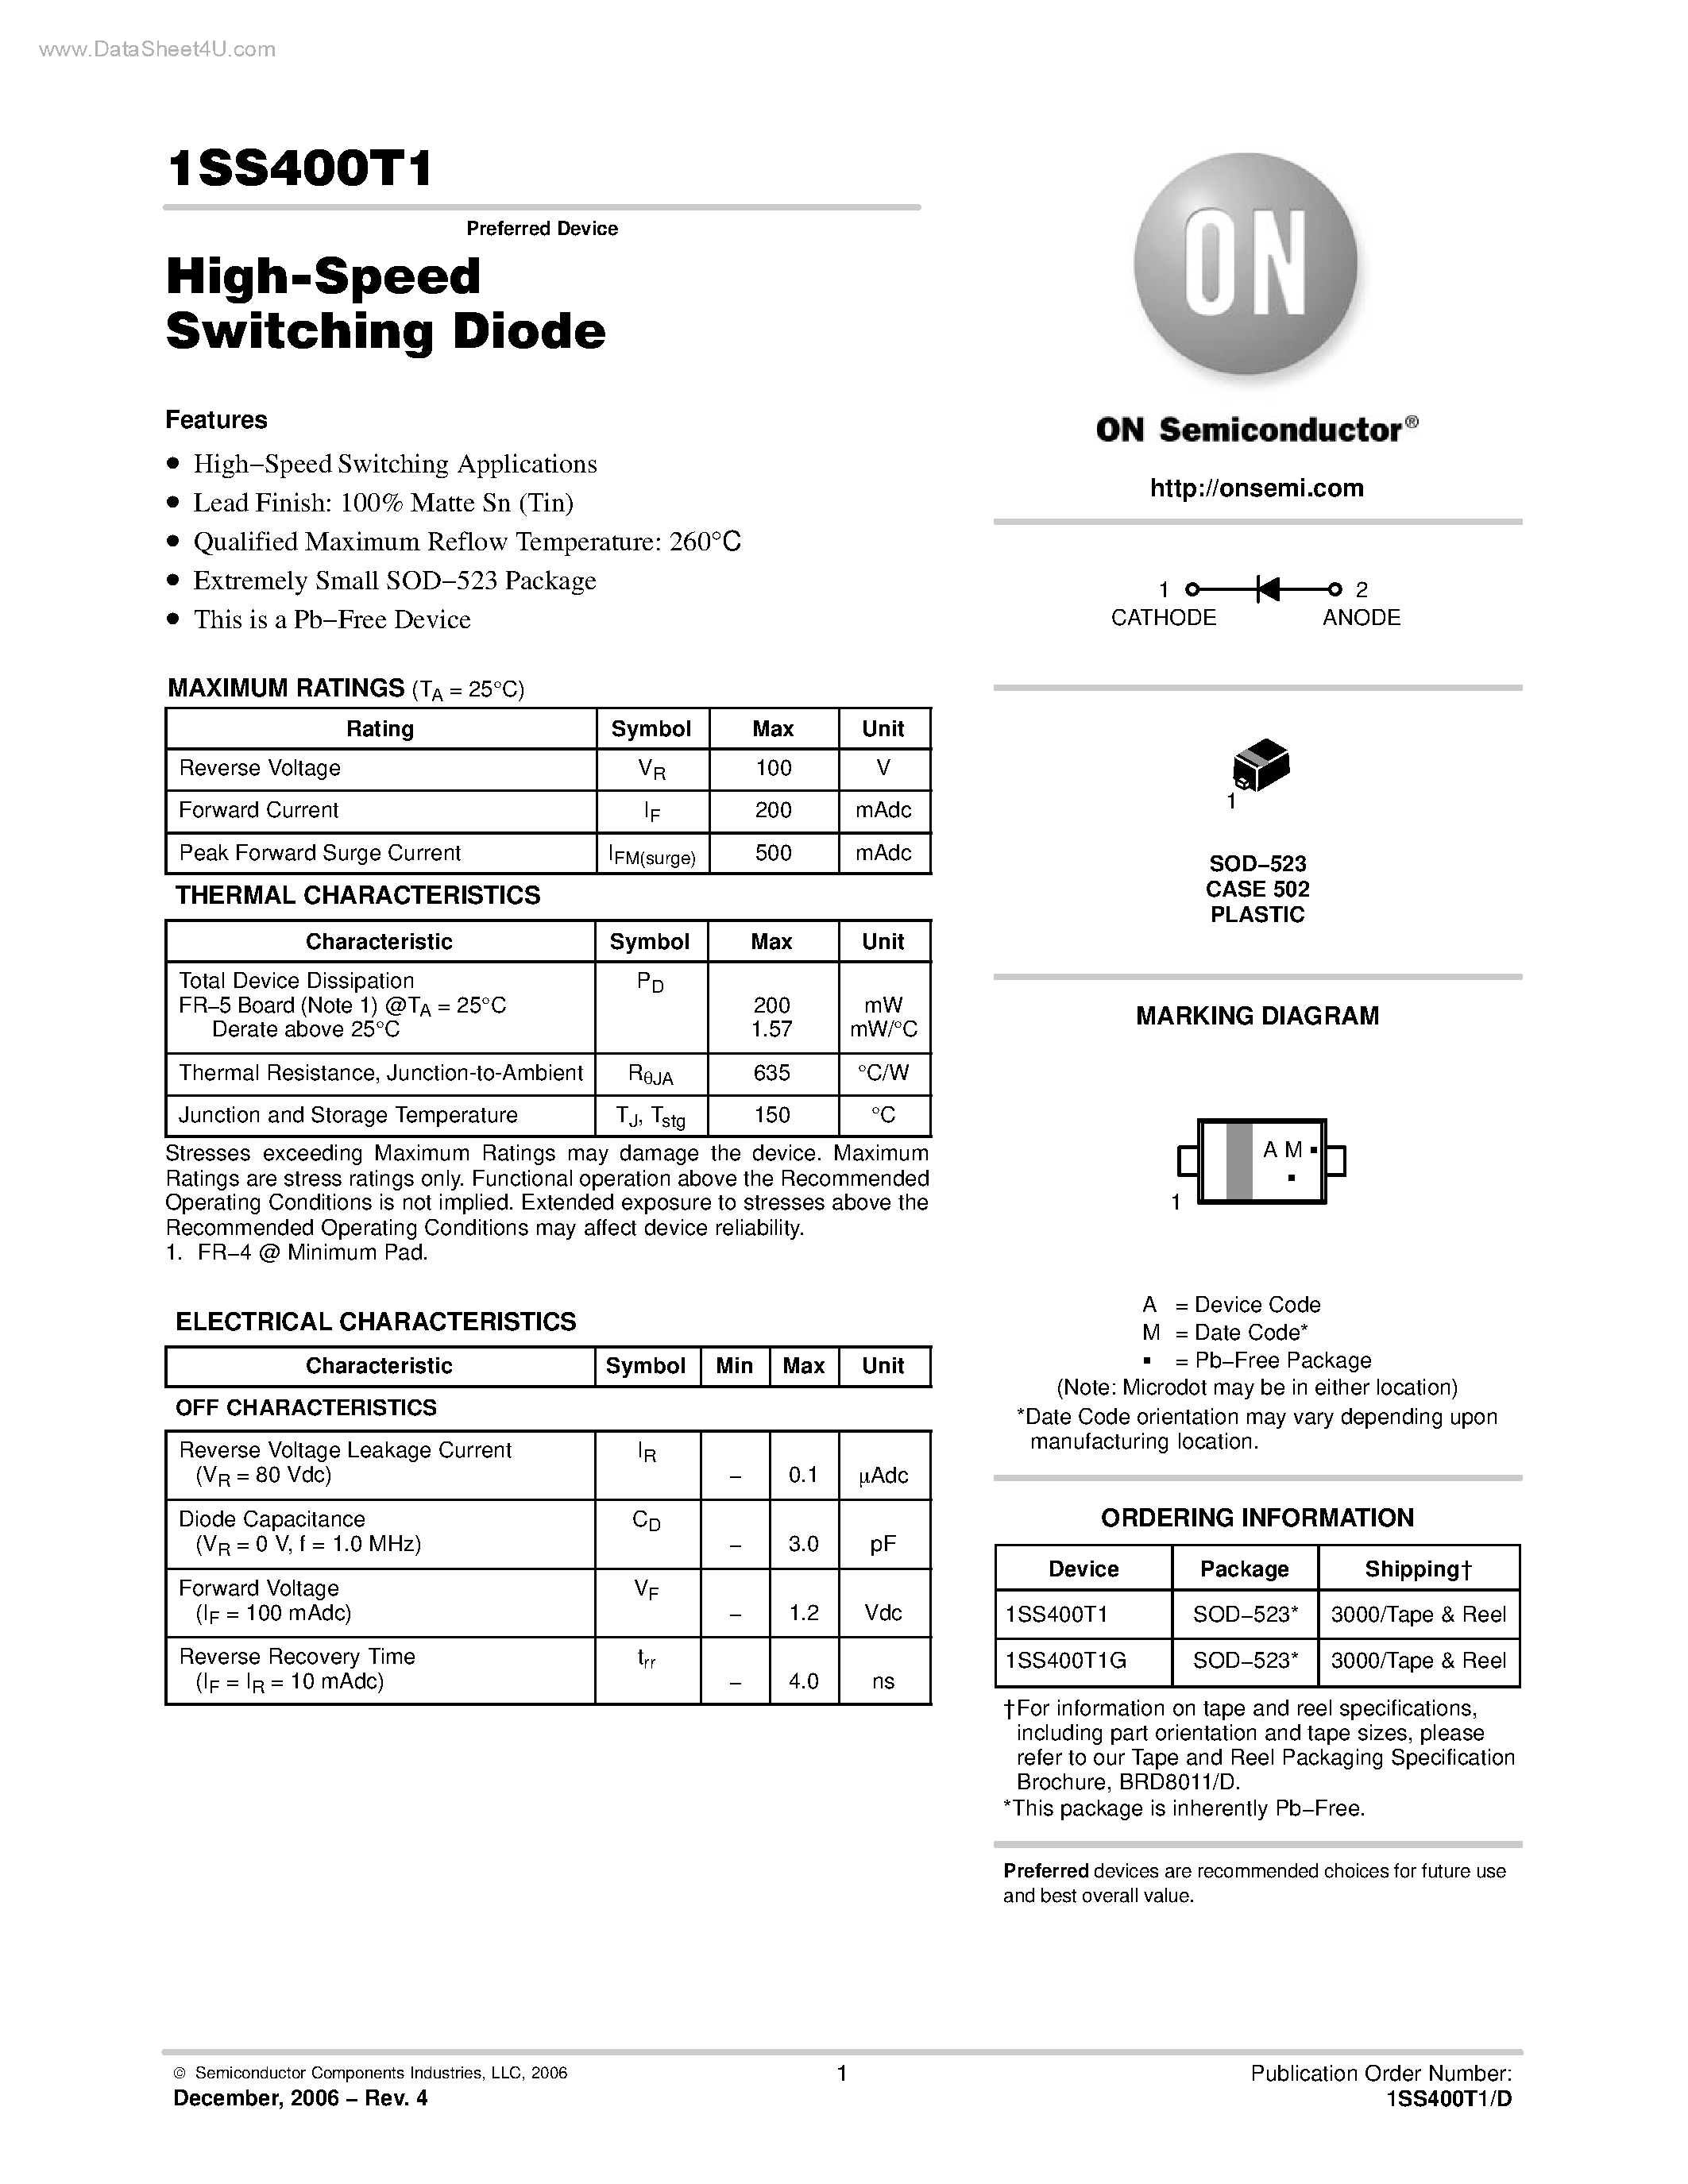 Datasheet 1SS400T1 - High Speed Switching Diode page 1